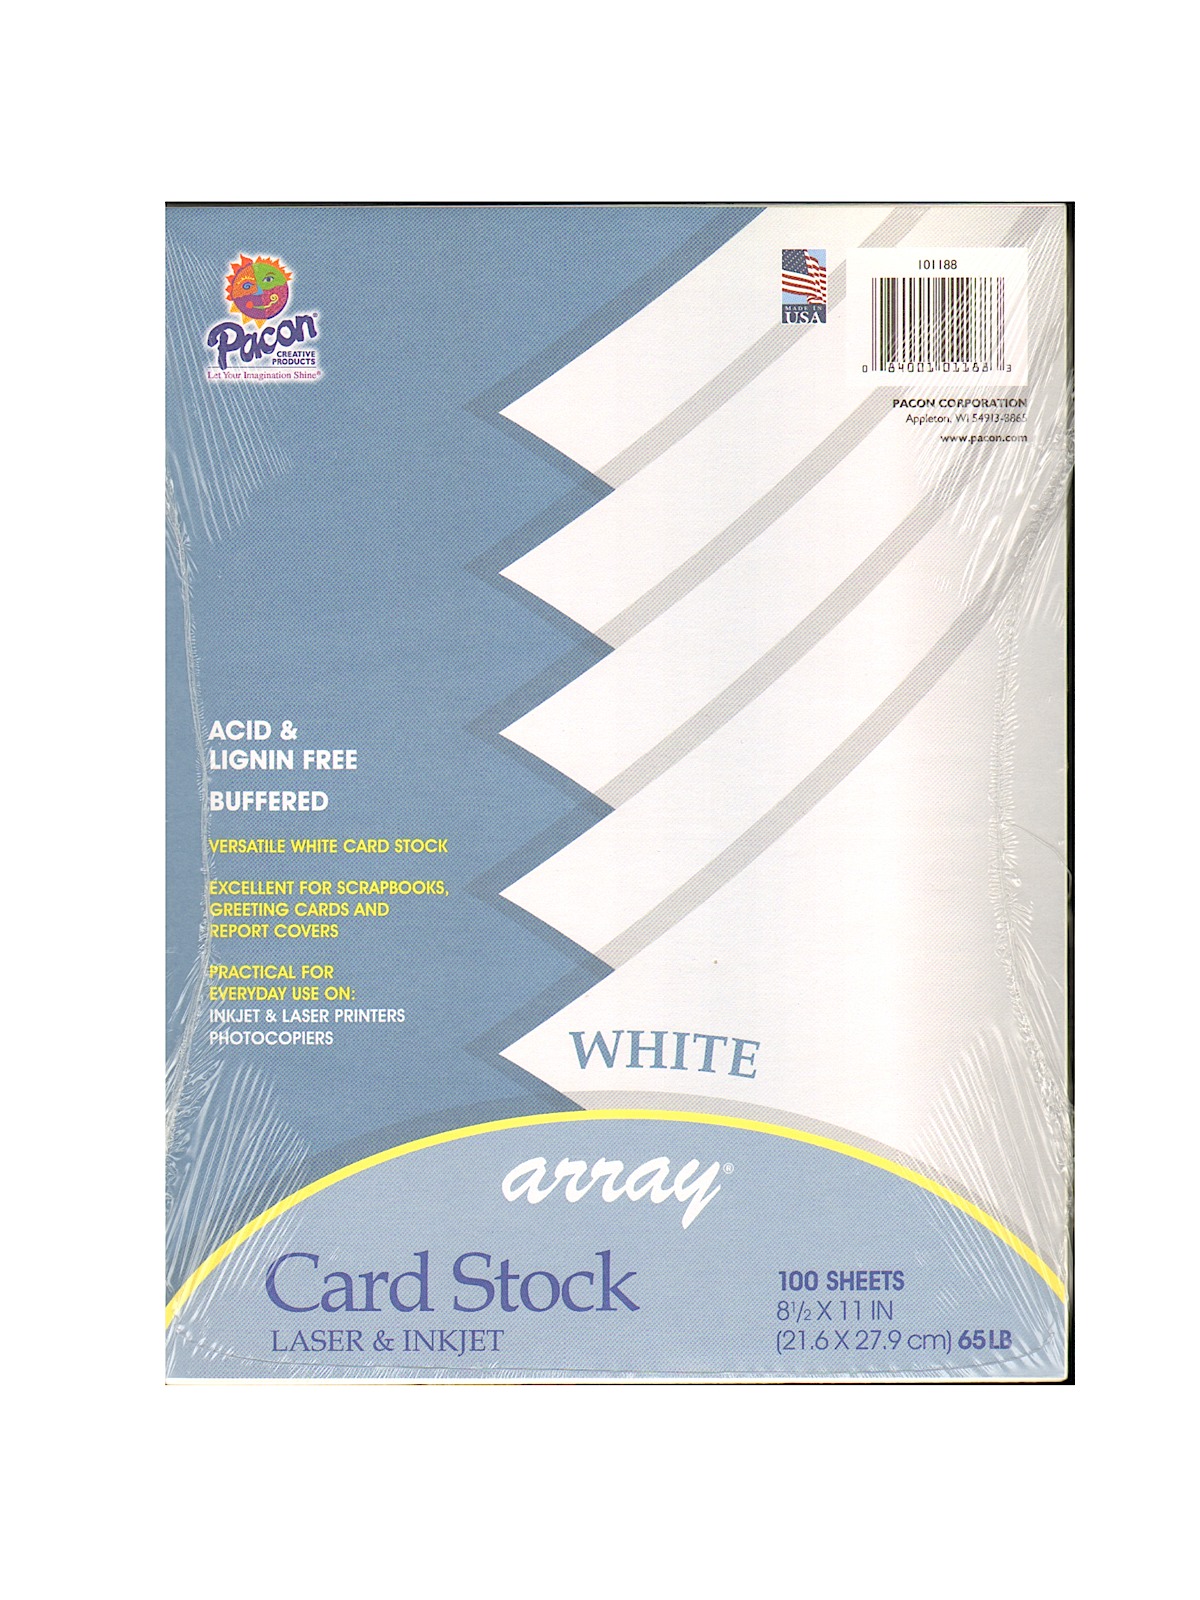 Array Card Stock White 8 1 2 In. X 11 In. Pack Of 100